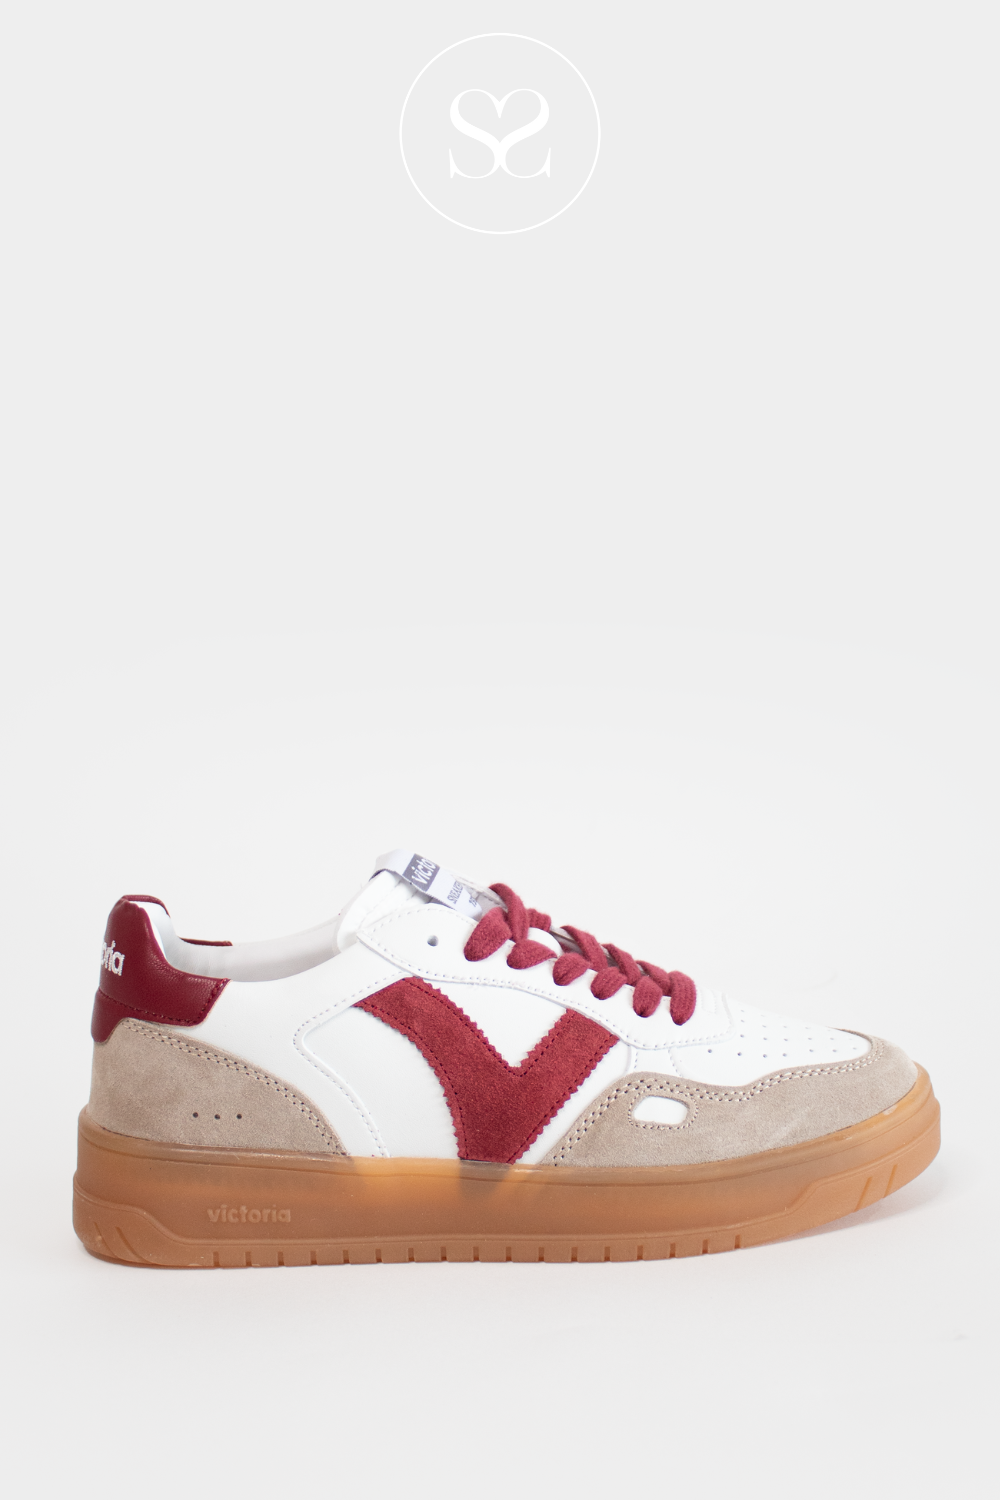 VICTORIA 1257125 RED/WHITE FLATFORM TRAINERS. VICTORIA CHUNKY SNEAKERS IRELAND